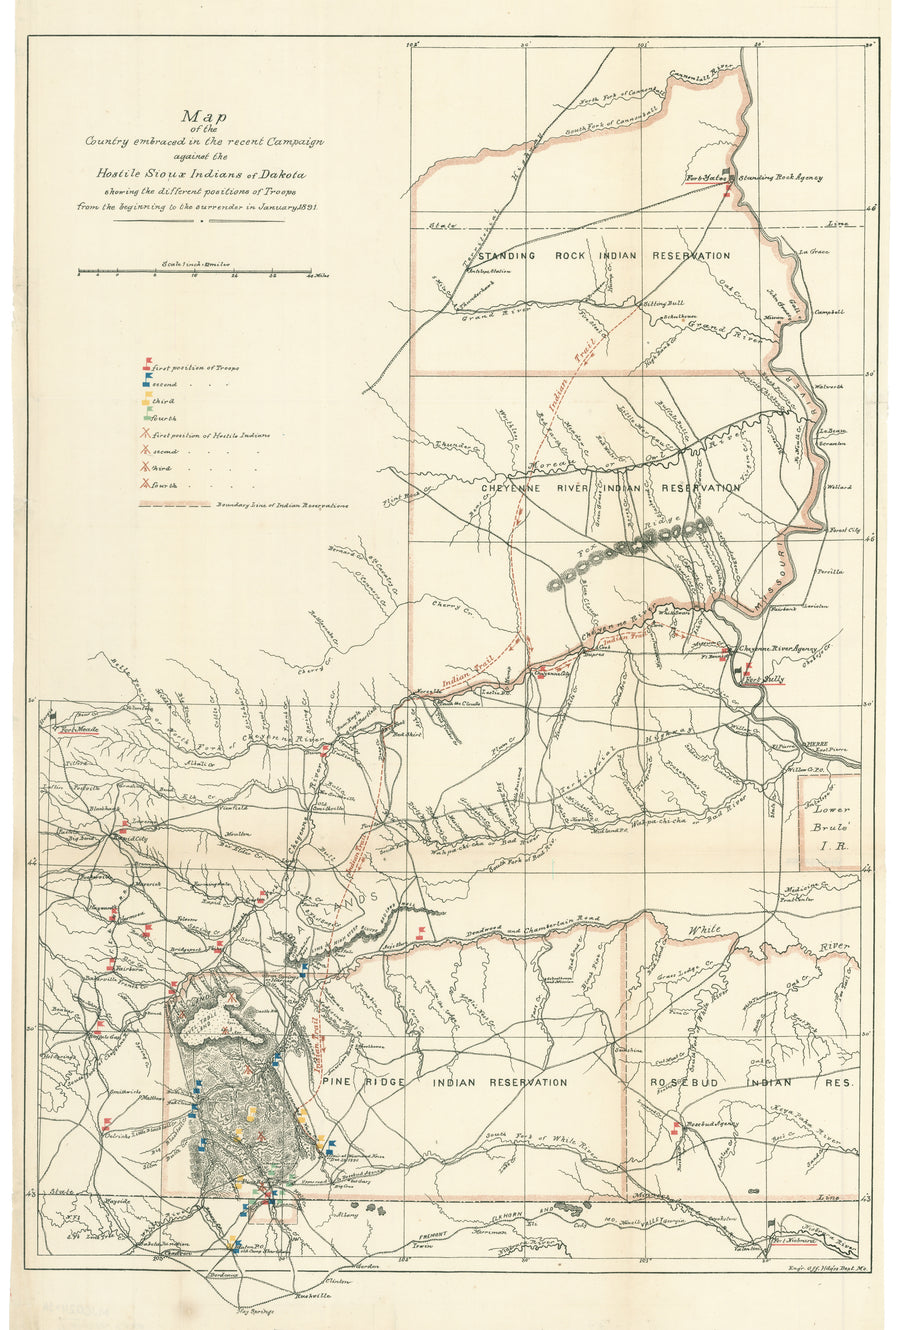 1890-91 Maps Showing the Battle at Wounded Knee